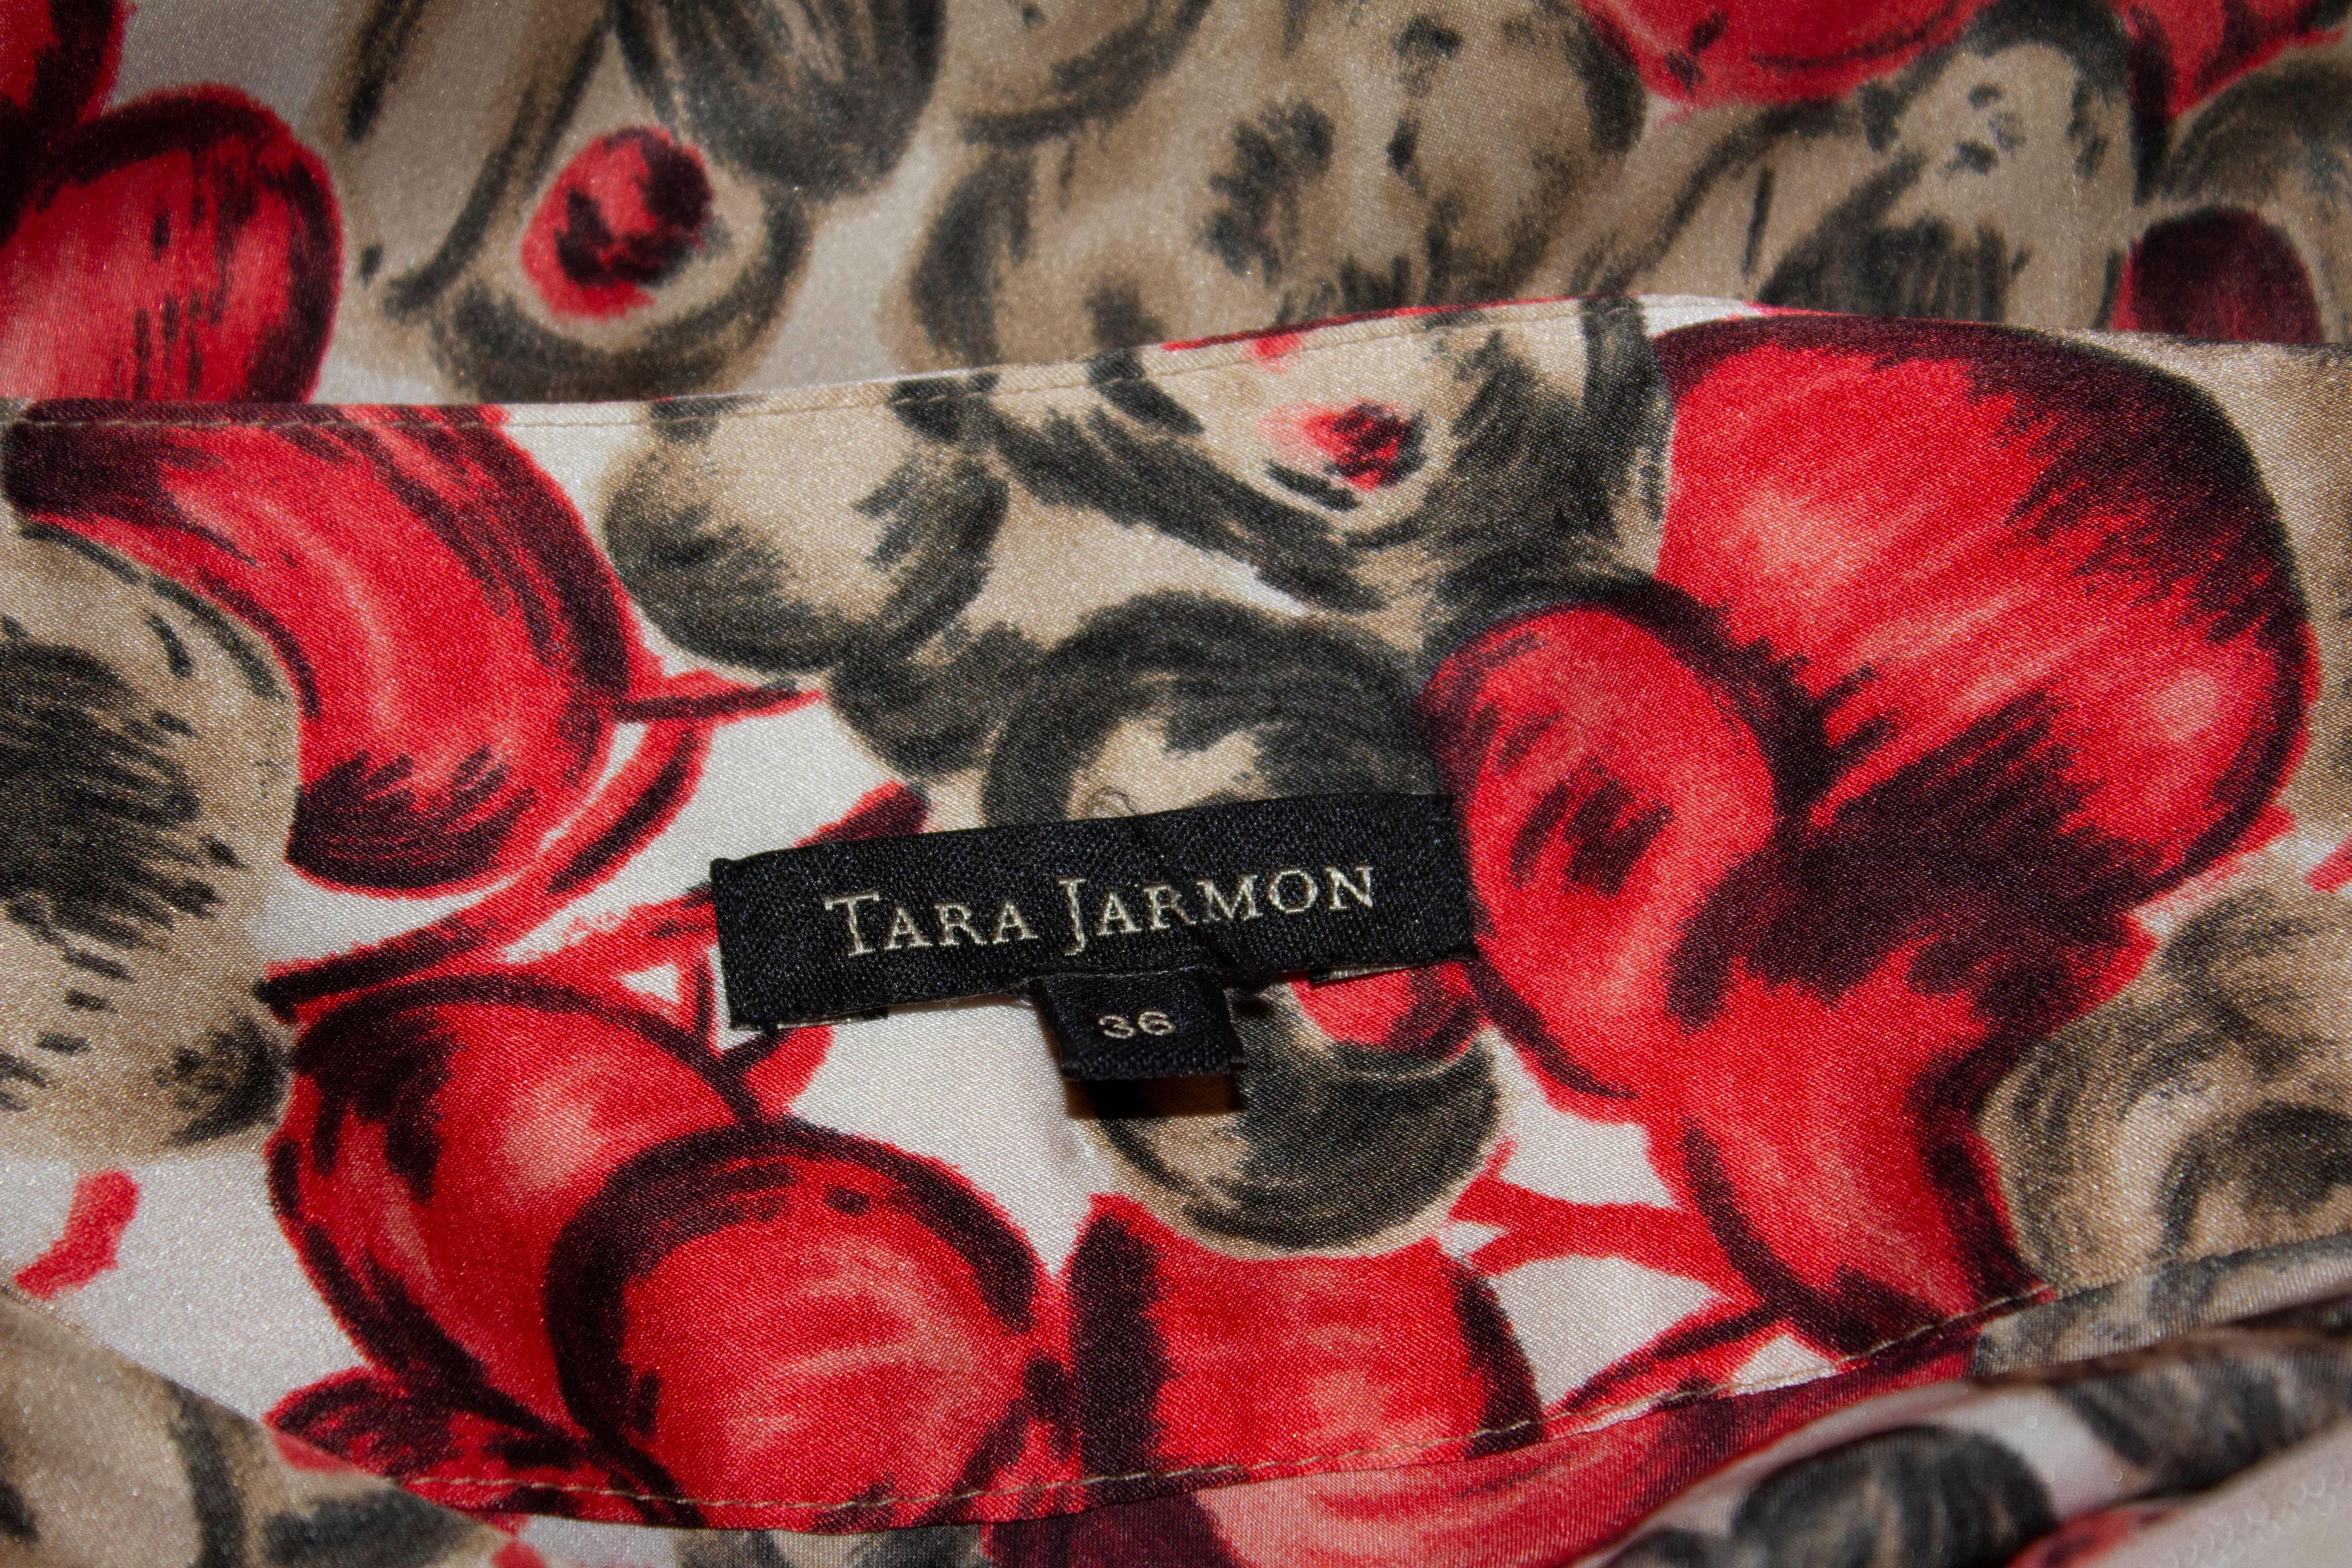 A fun and flirty silk skirt by Tara Jamon in a red and white cherry print. The skirt has a side zip opening , detail on the front and is unlined.